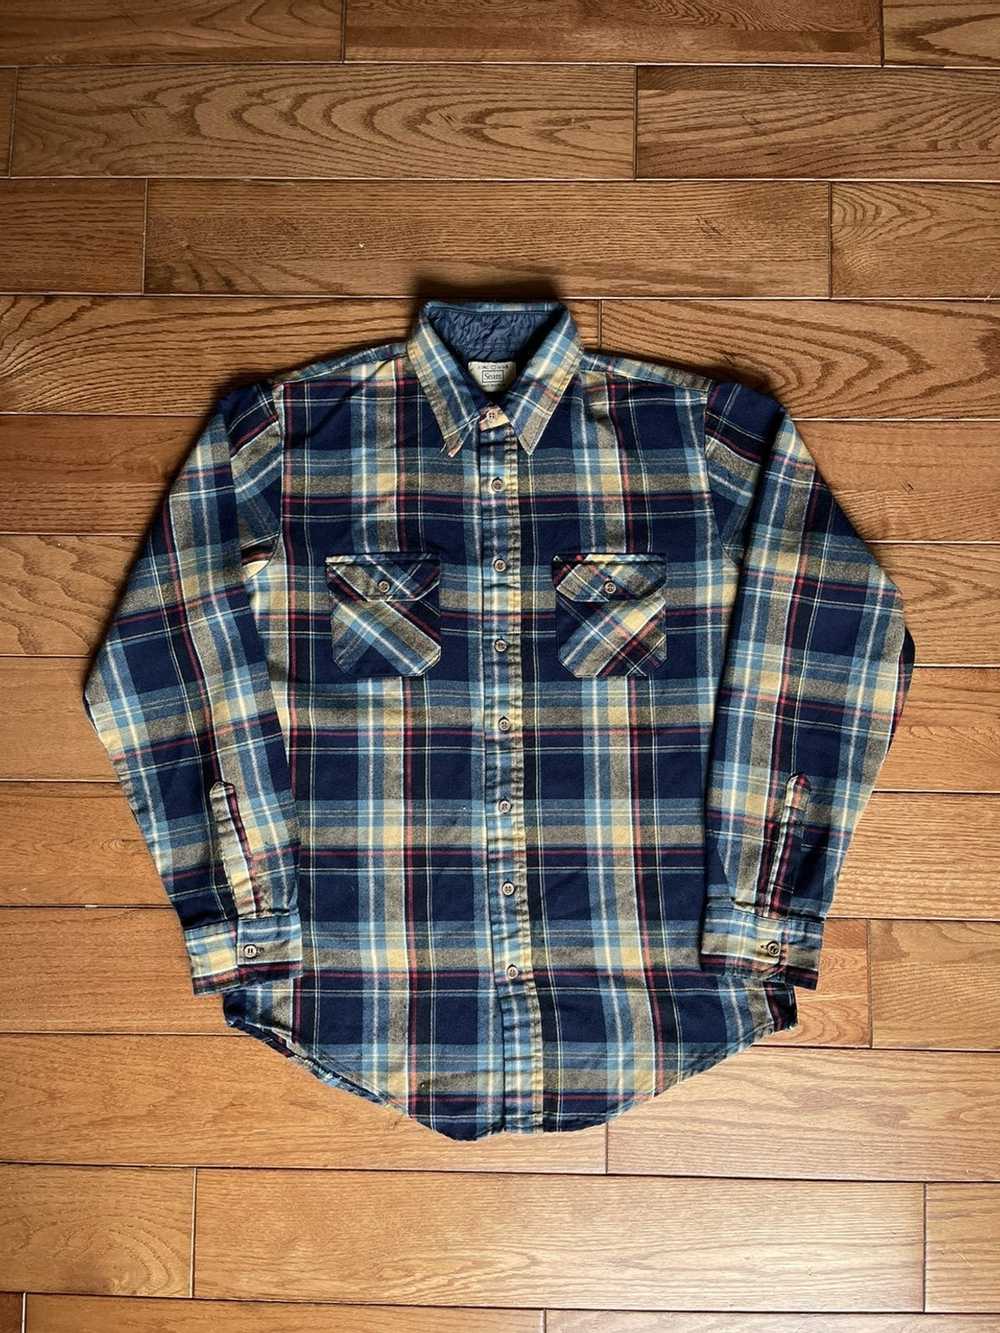 Sears × Vintage Vintage Sears Flannel Button Up S… - image 1